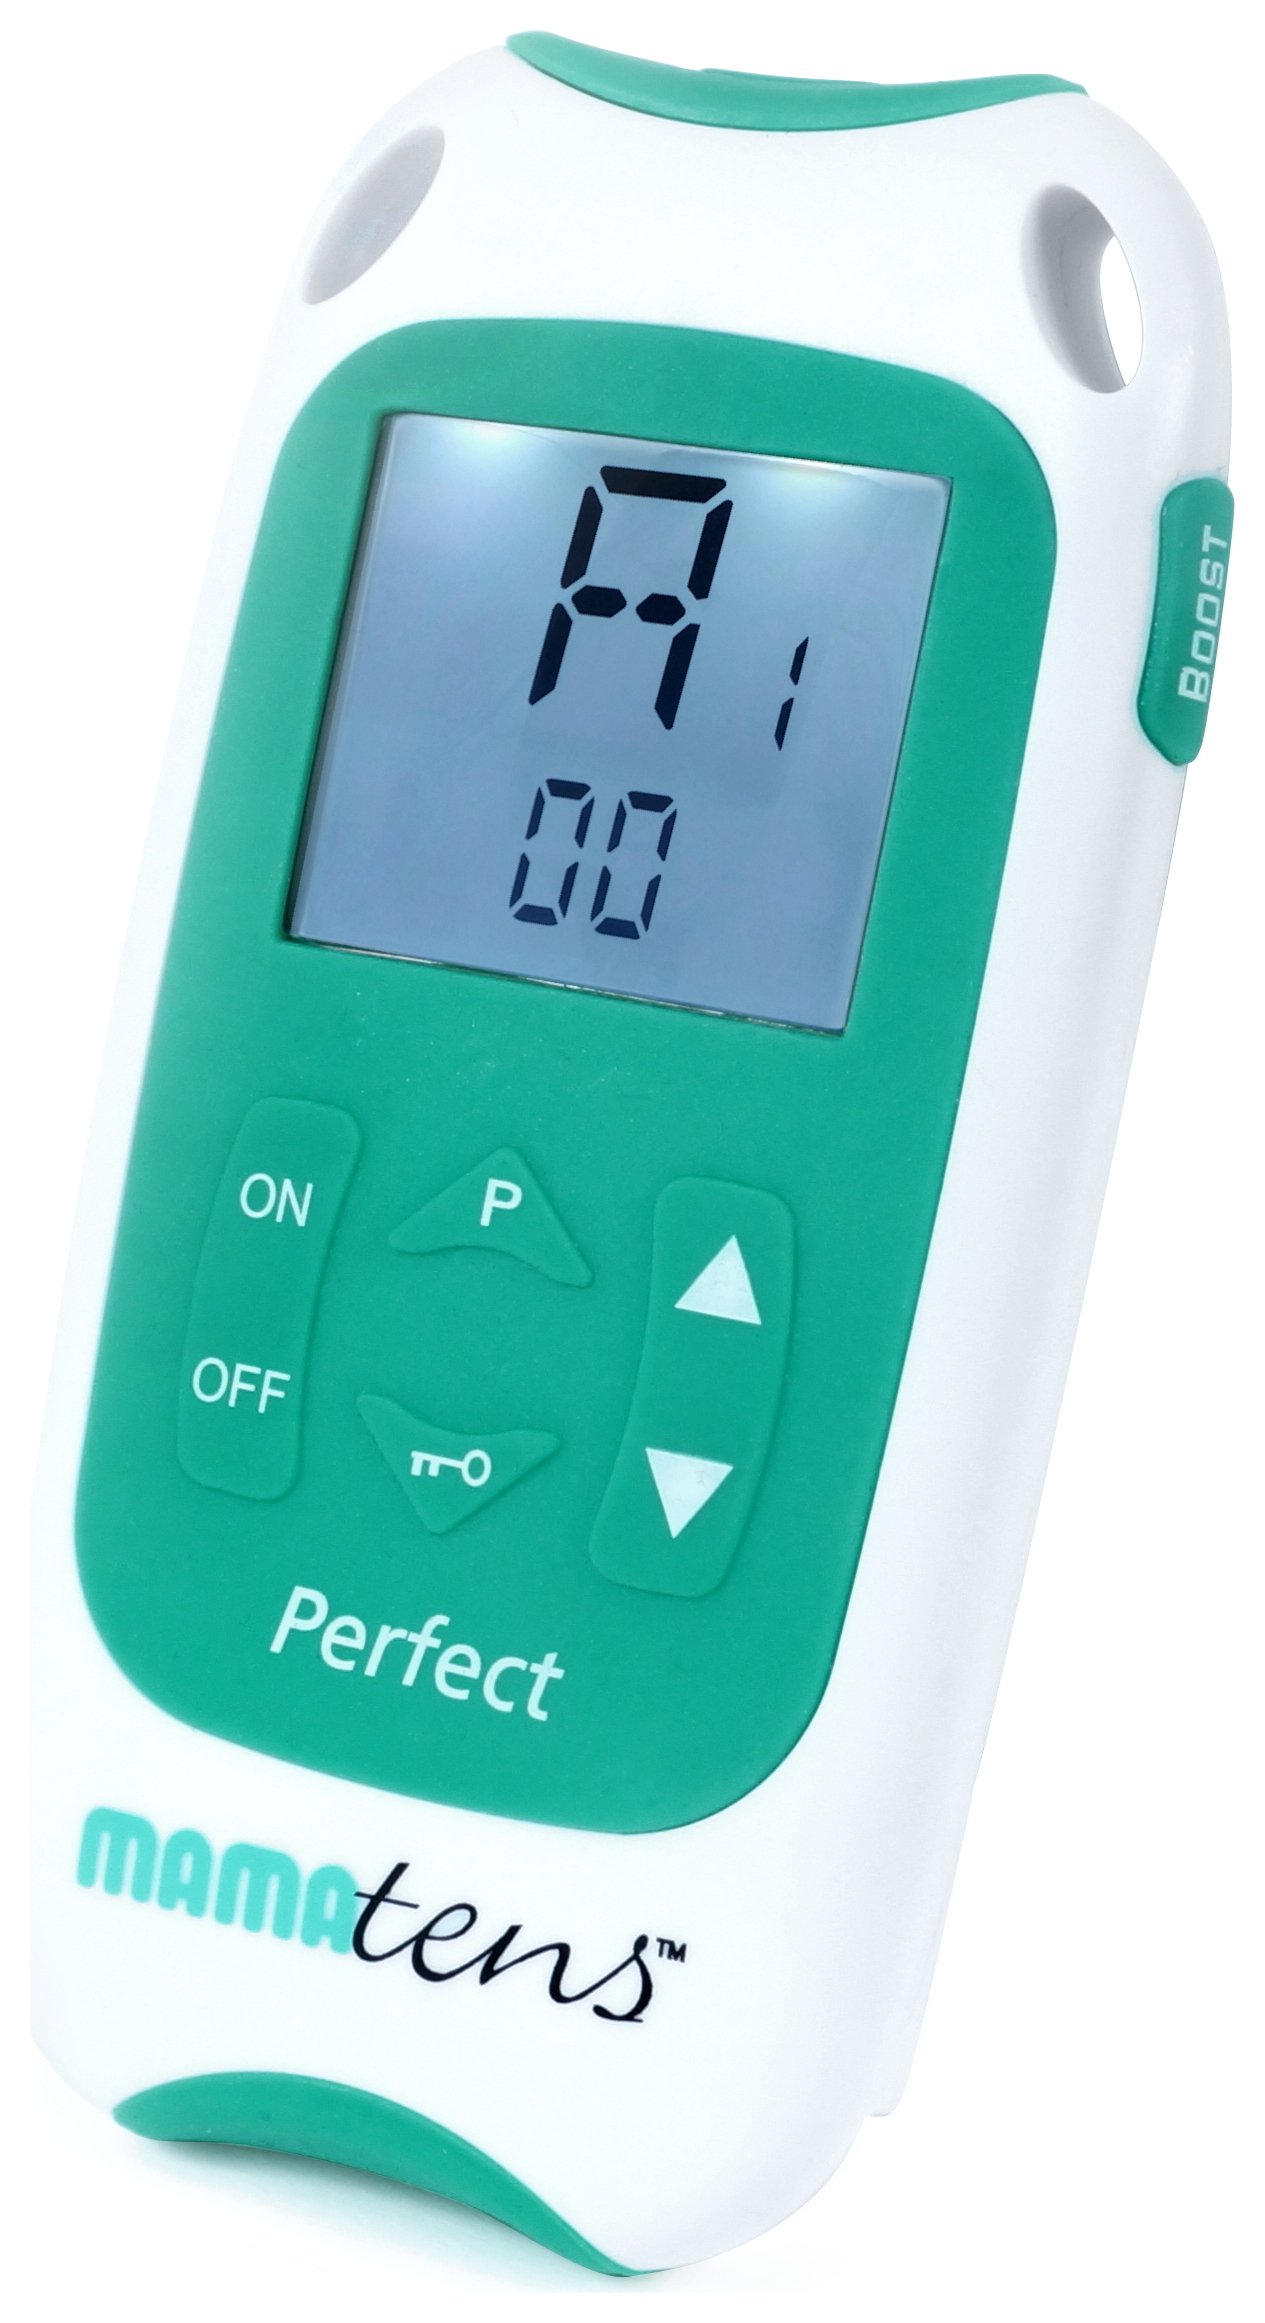 Tenscare Perfect Mama Tens Maternity Tens Machine. Review